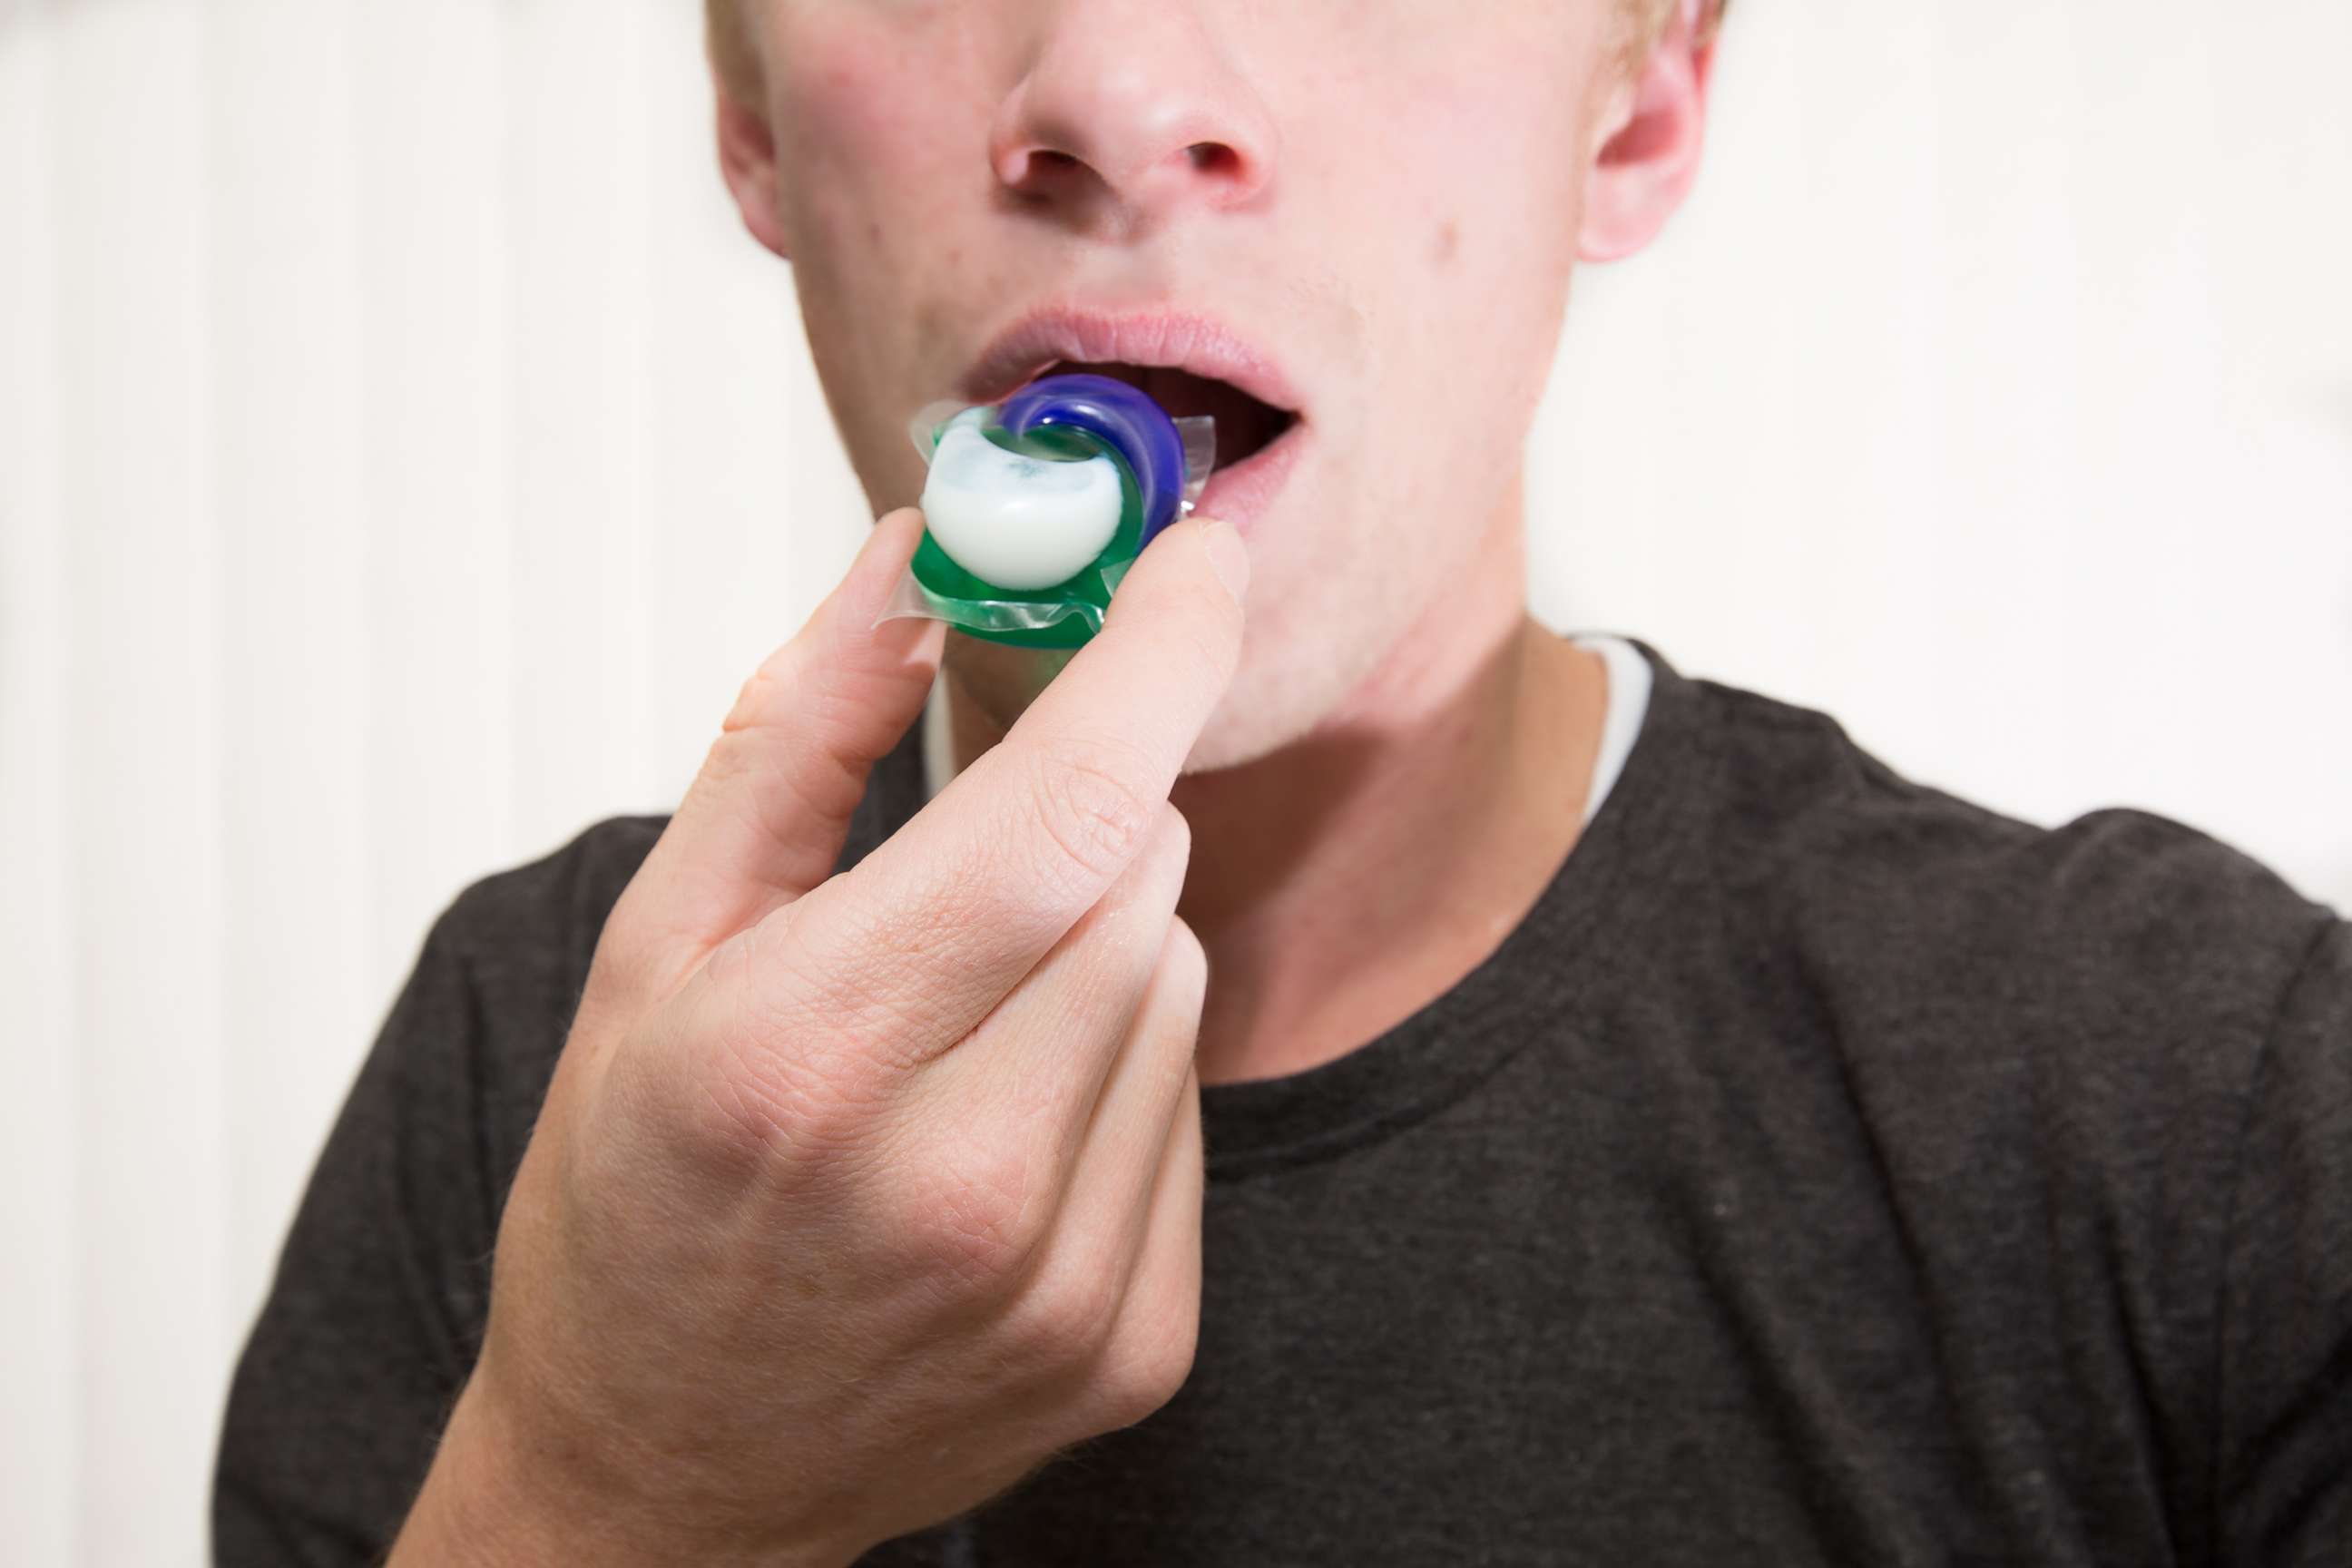 PHOTO: A teen is pictured attempting to eat a Tide detergent pod in this undated stock photo.